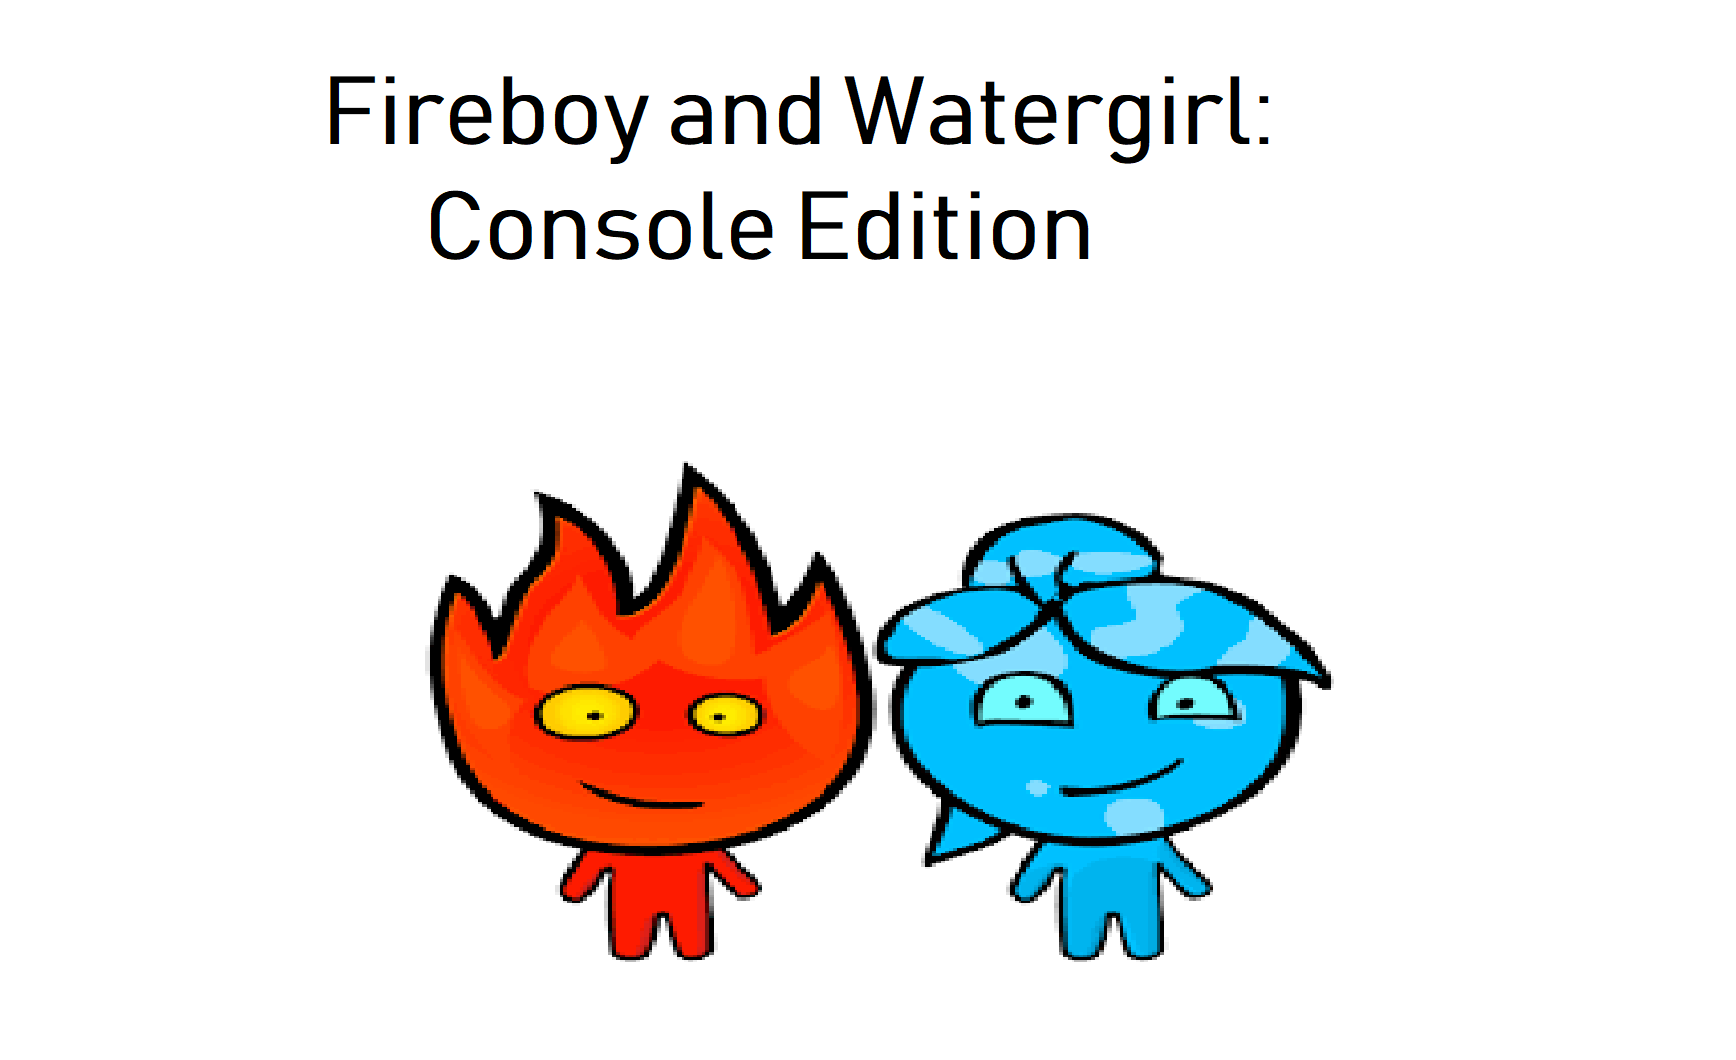 Fireboy and Watergirl Games - Play All the Games